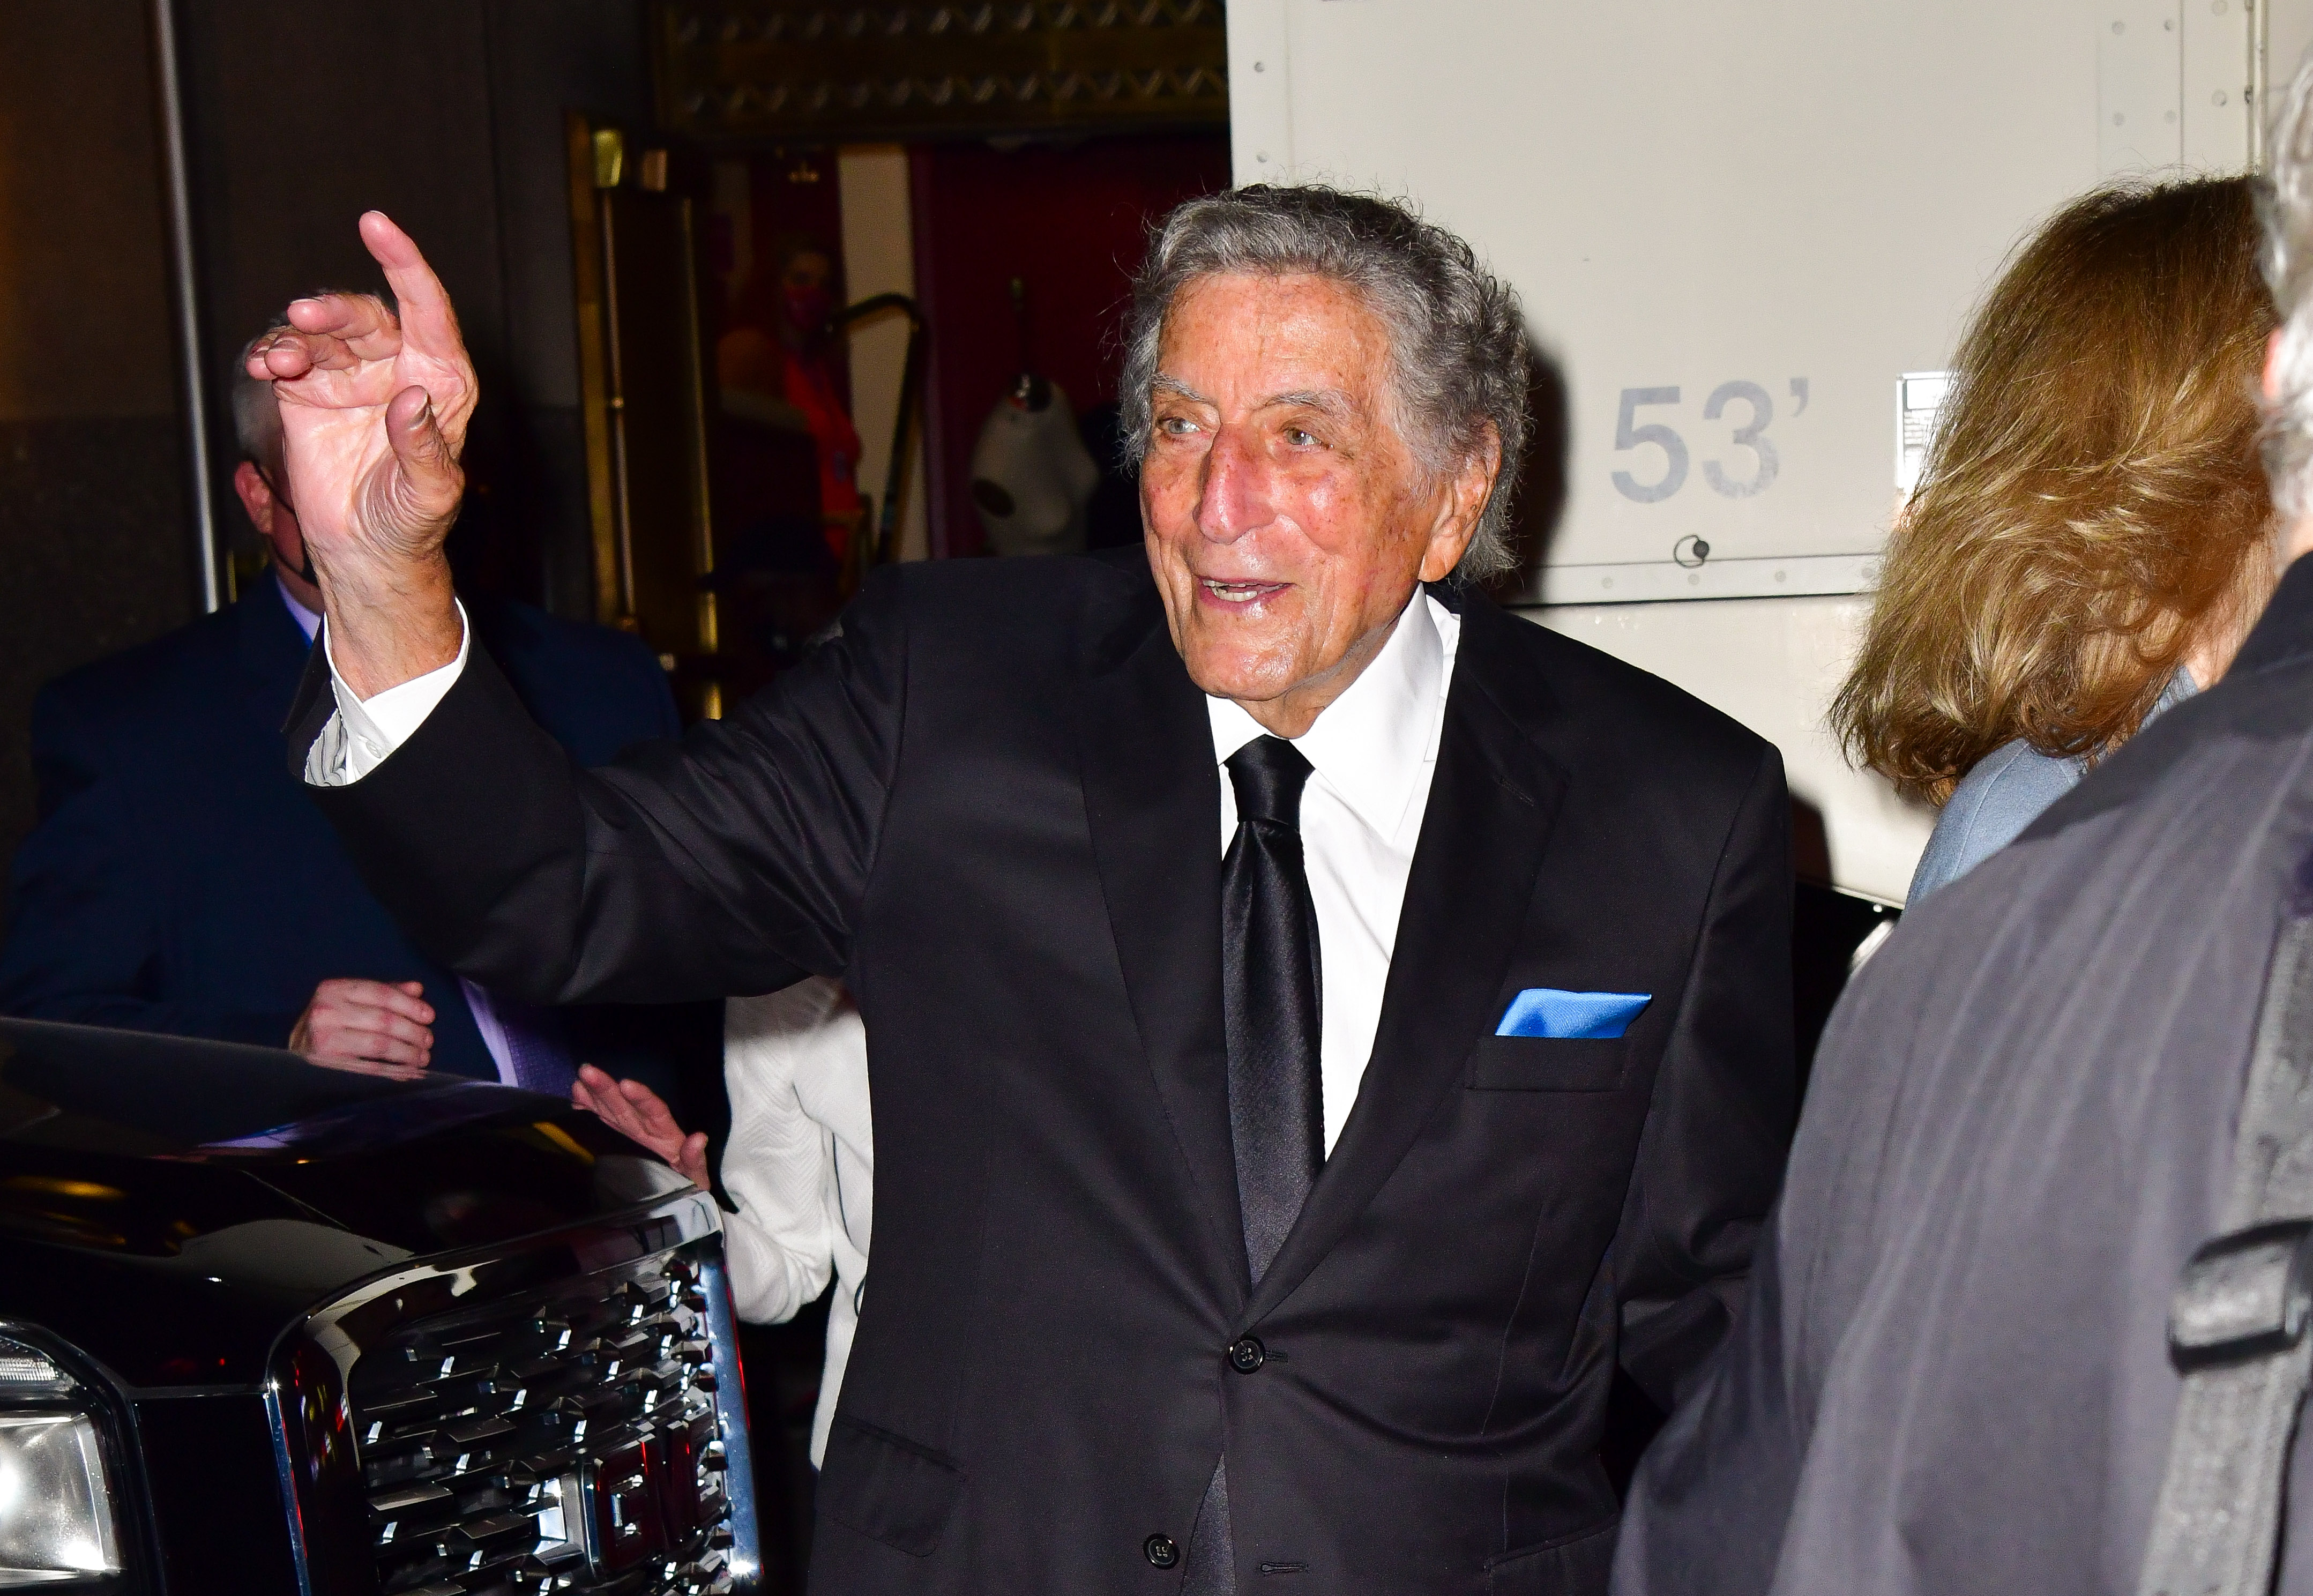 Tony Bennett in New York in 2021 | Source: Getty Images